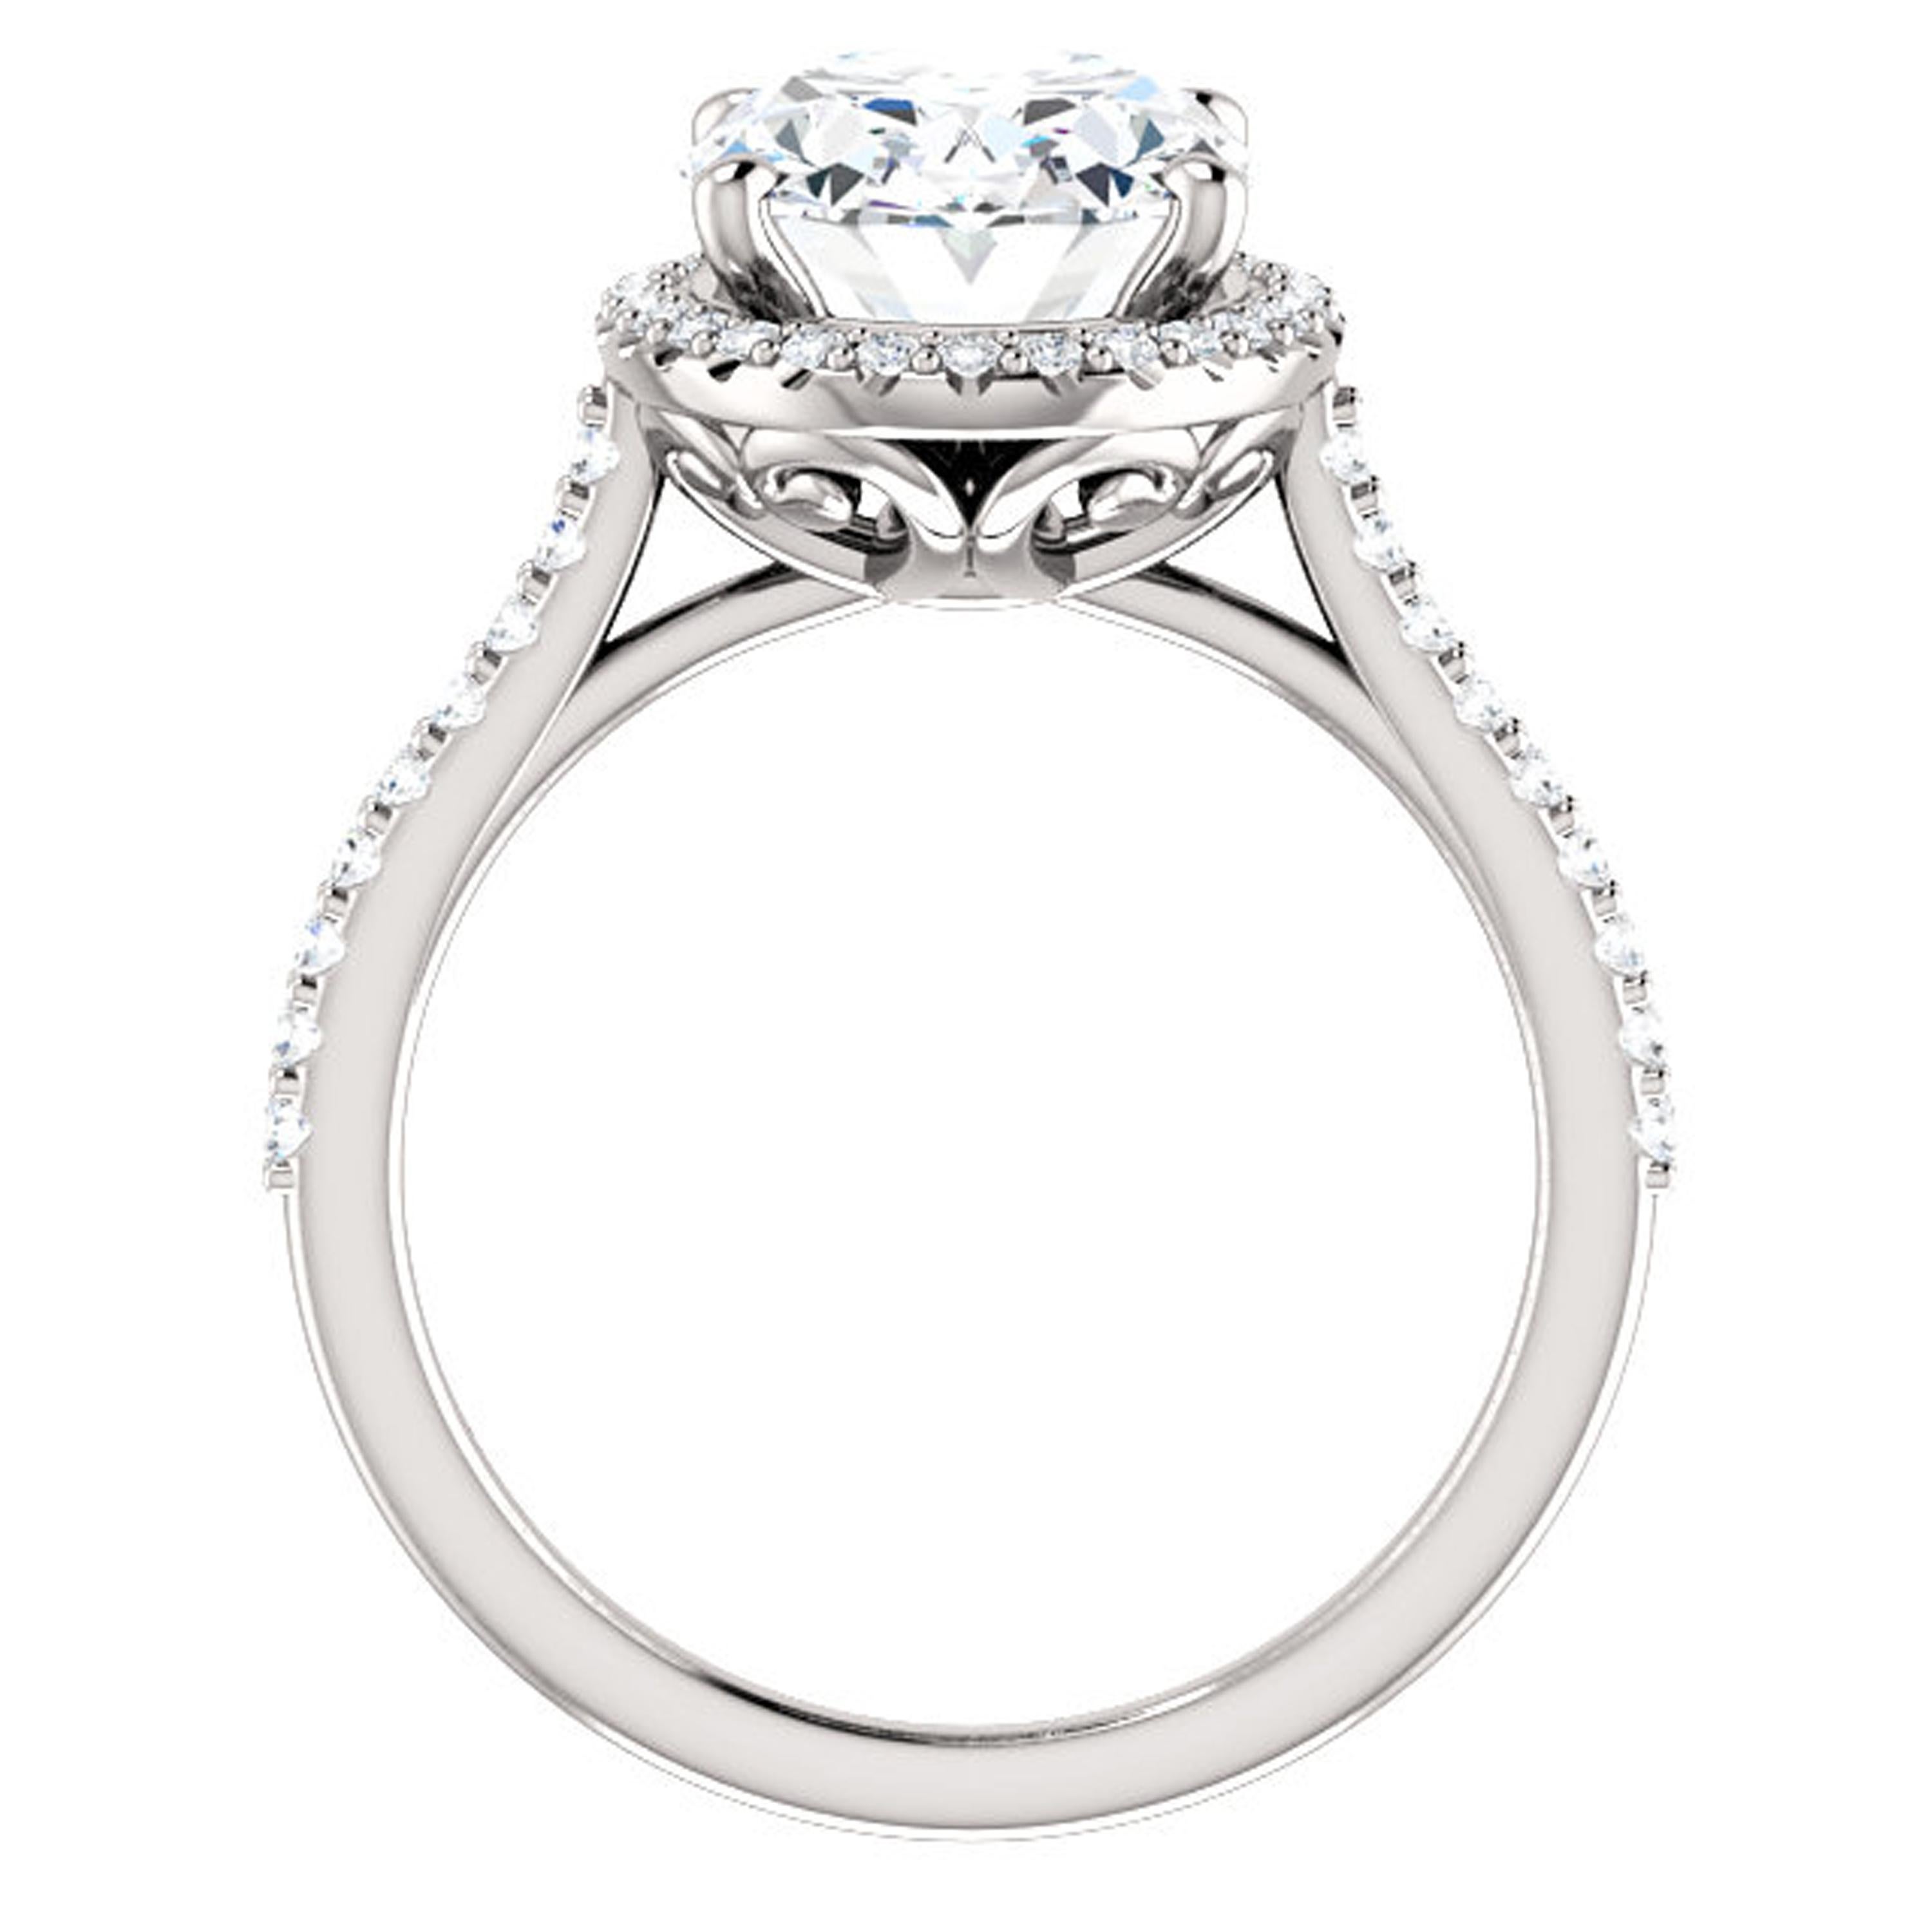 Luxurious and beautiful, this unique engagement ring showcases a cathedral setting with rising arches that reach the center stone. Lustrous shared prong white diamonds dance along the shank and surround the halo; amplifying the Forever One Charles &